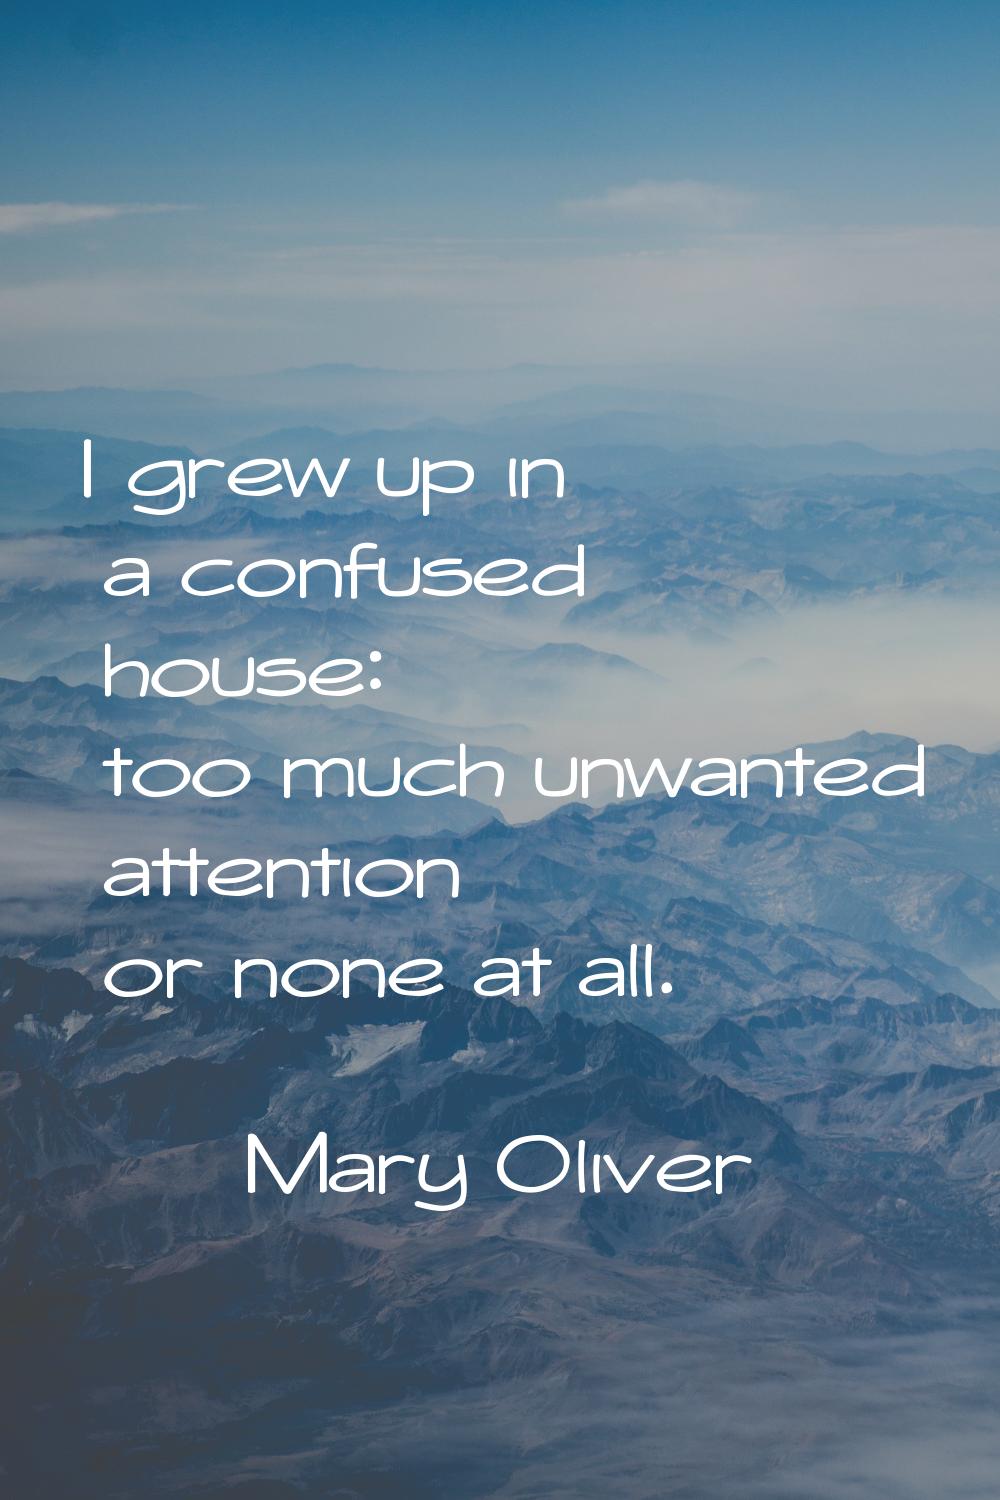 I grew up in a confused house: too much unwanted attention or none at all.